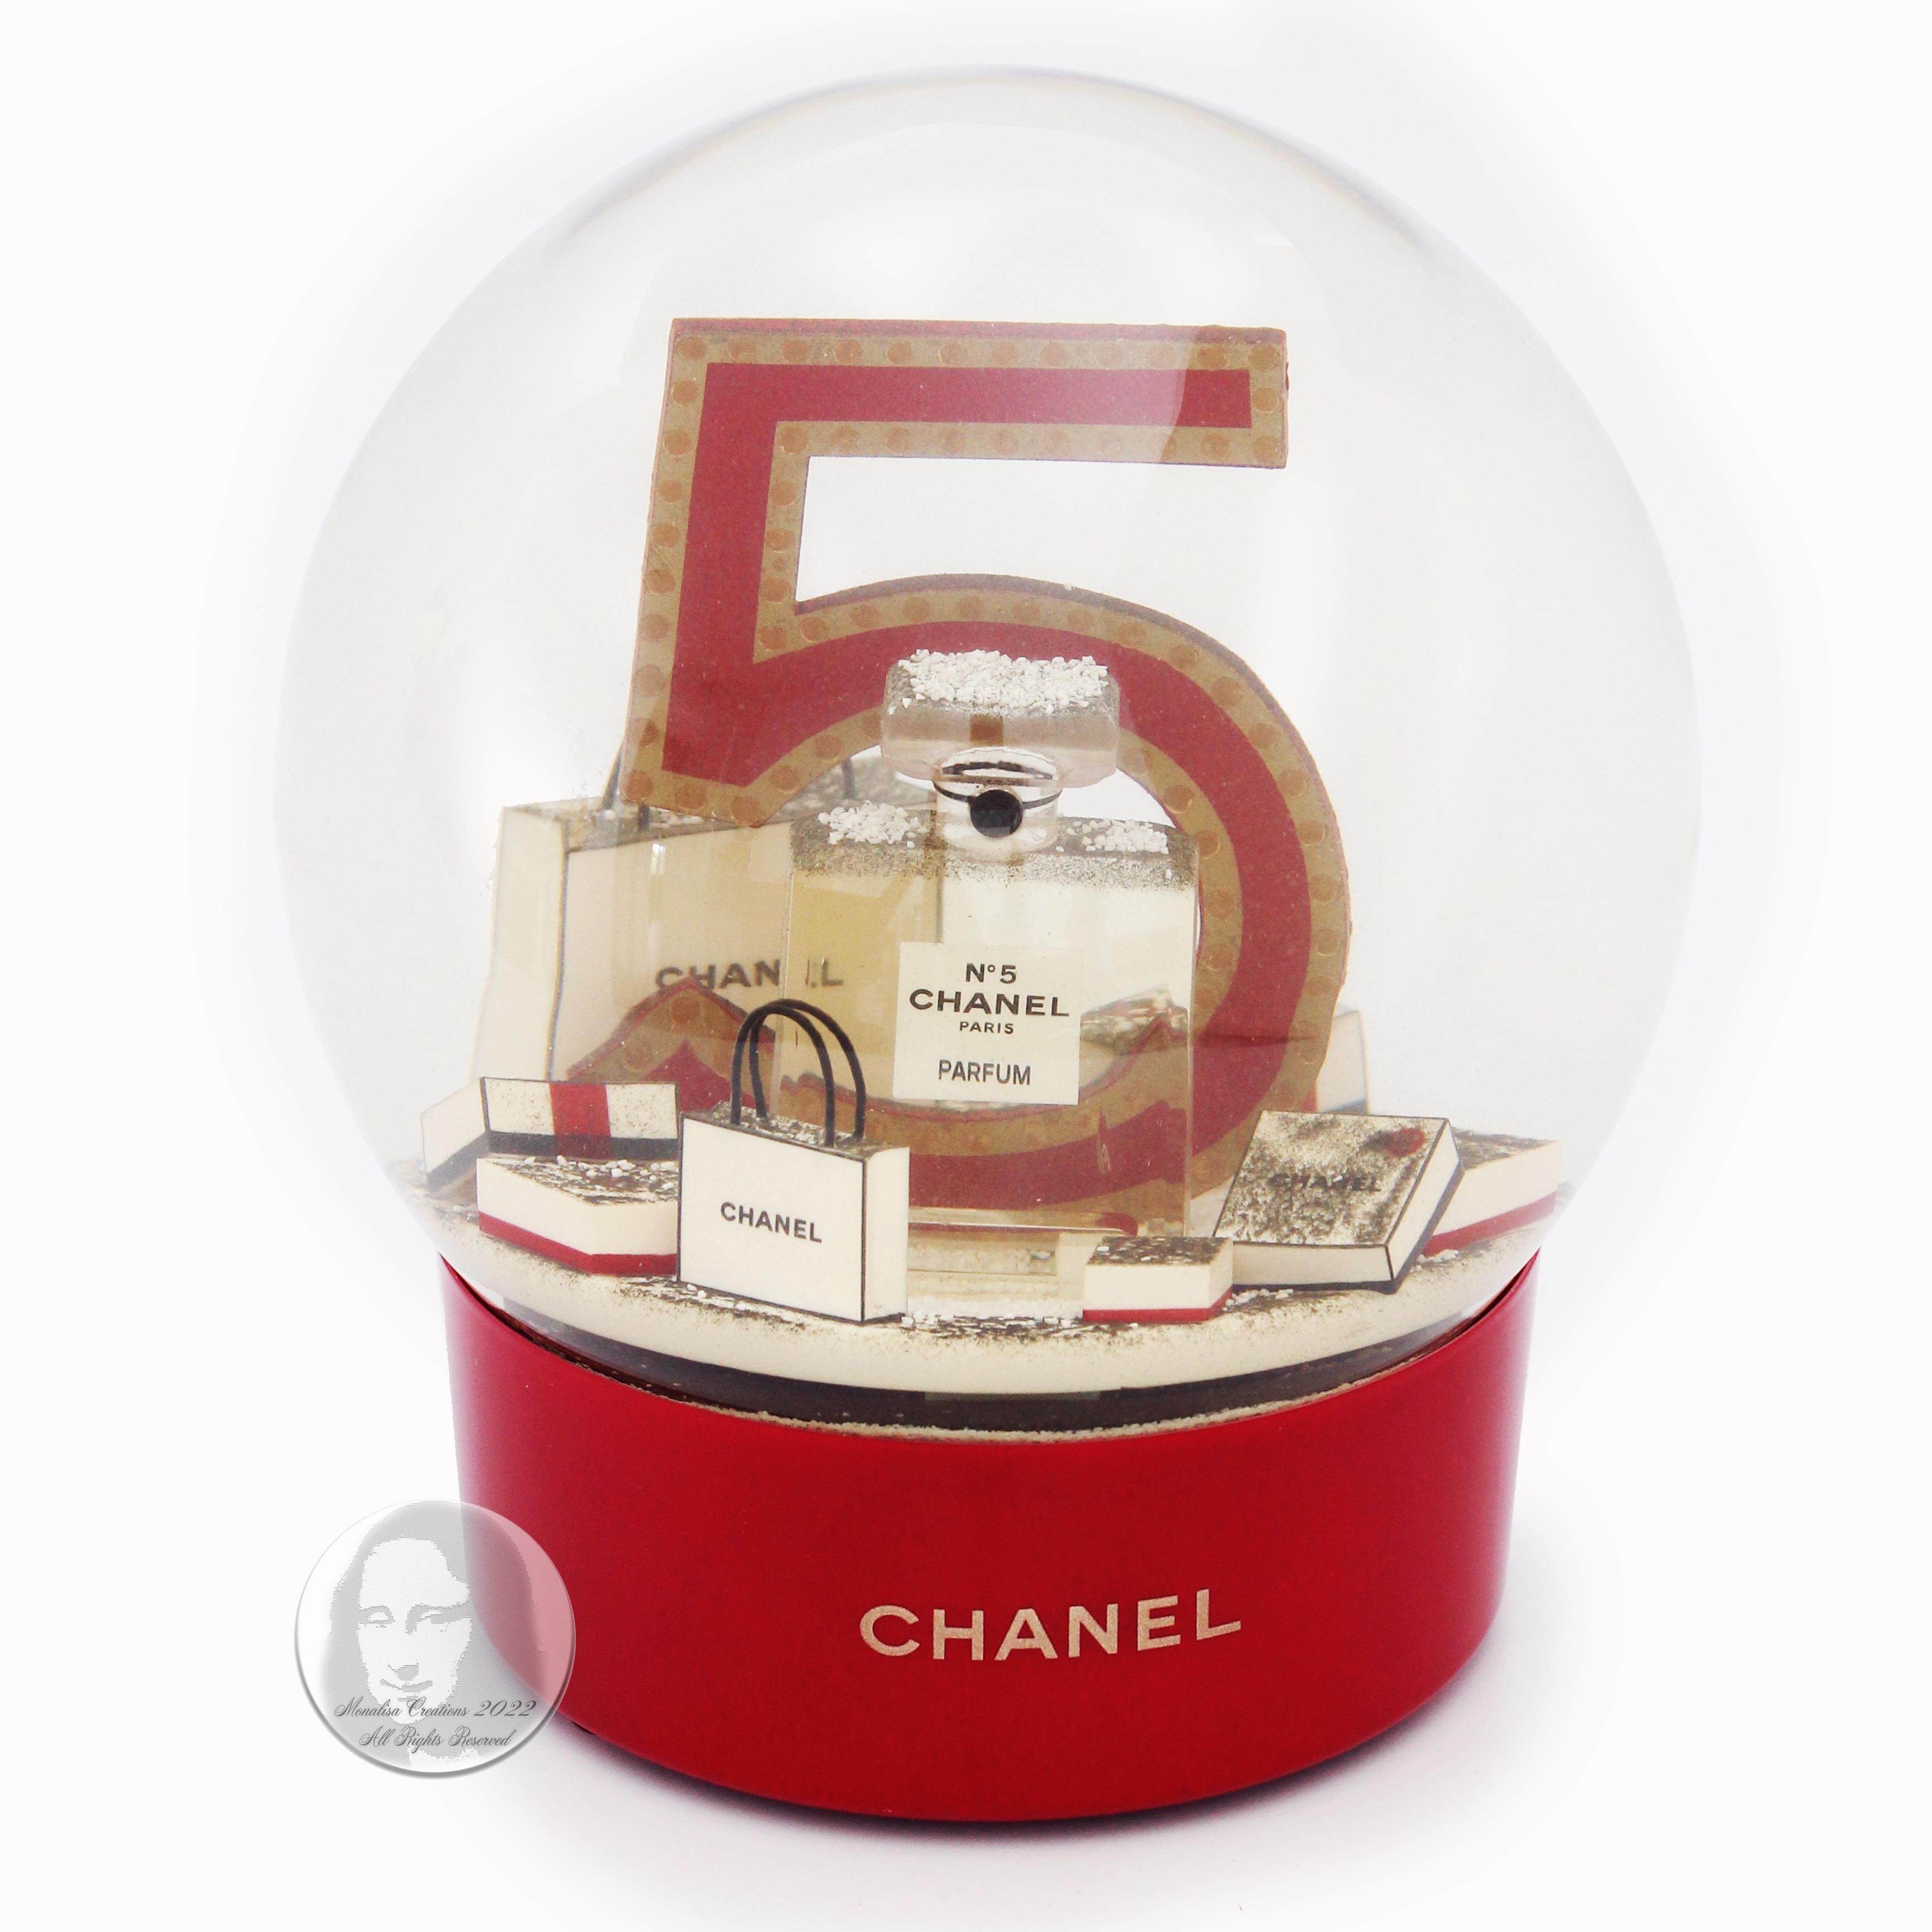 Chanel Home Decor - 13 For Sale on 1stDibs